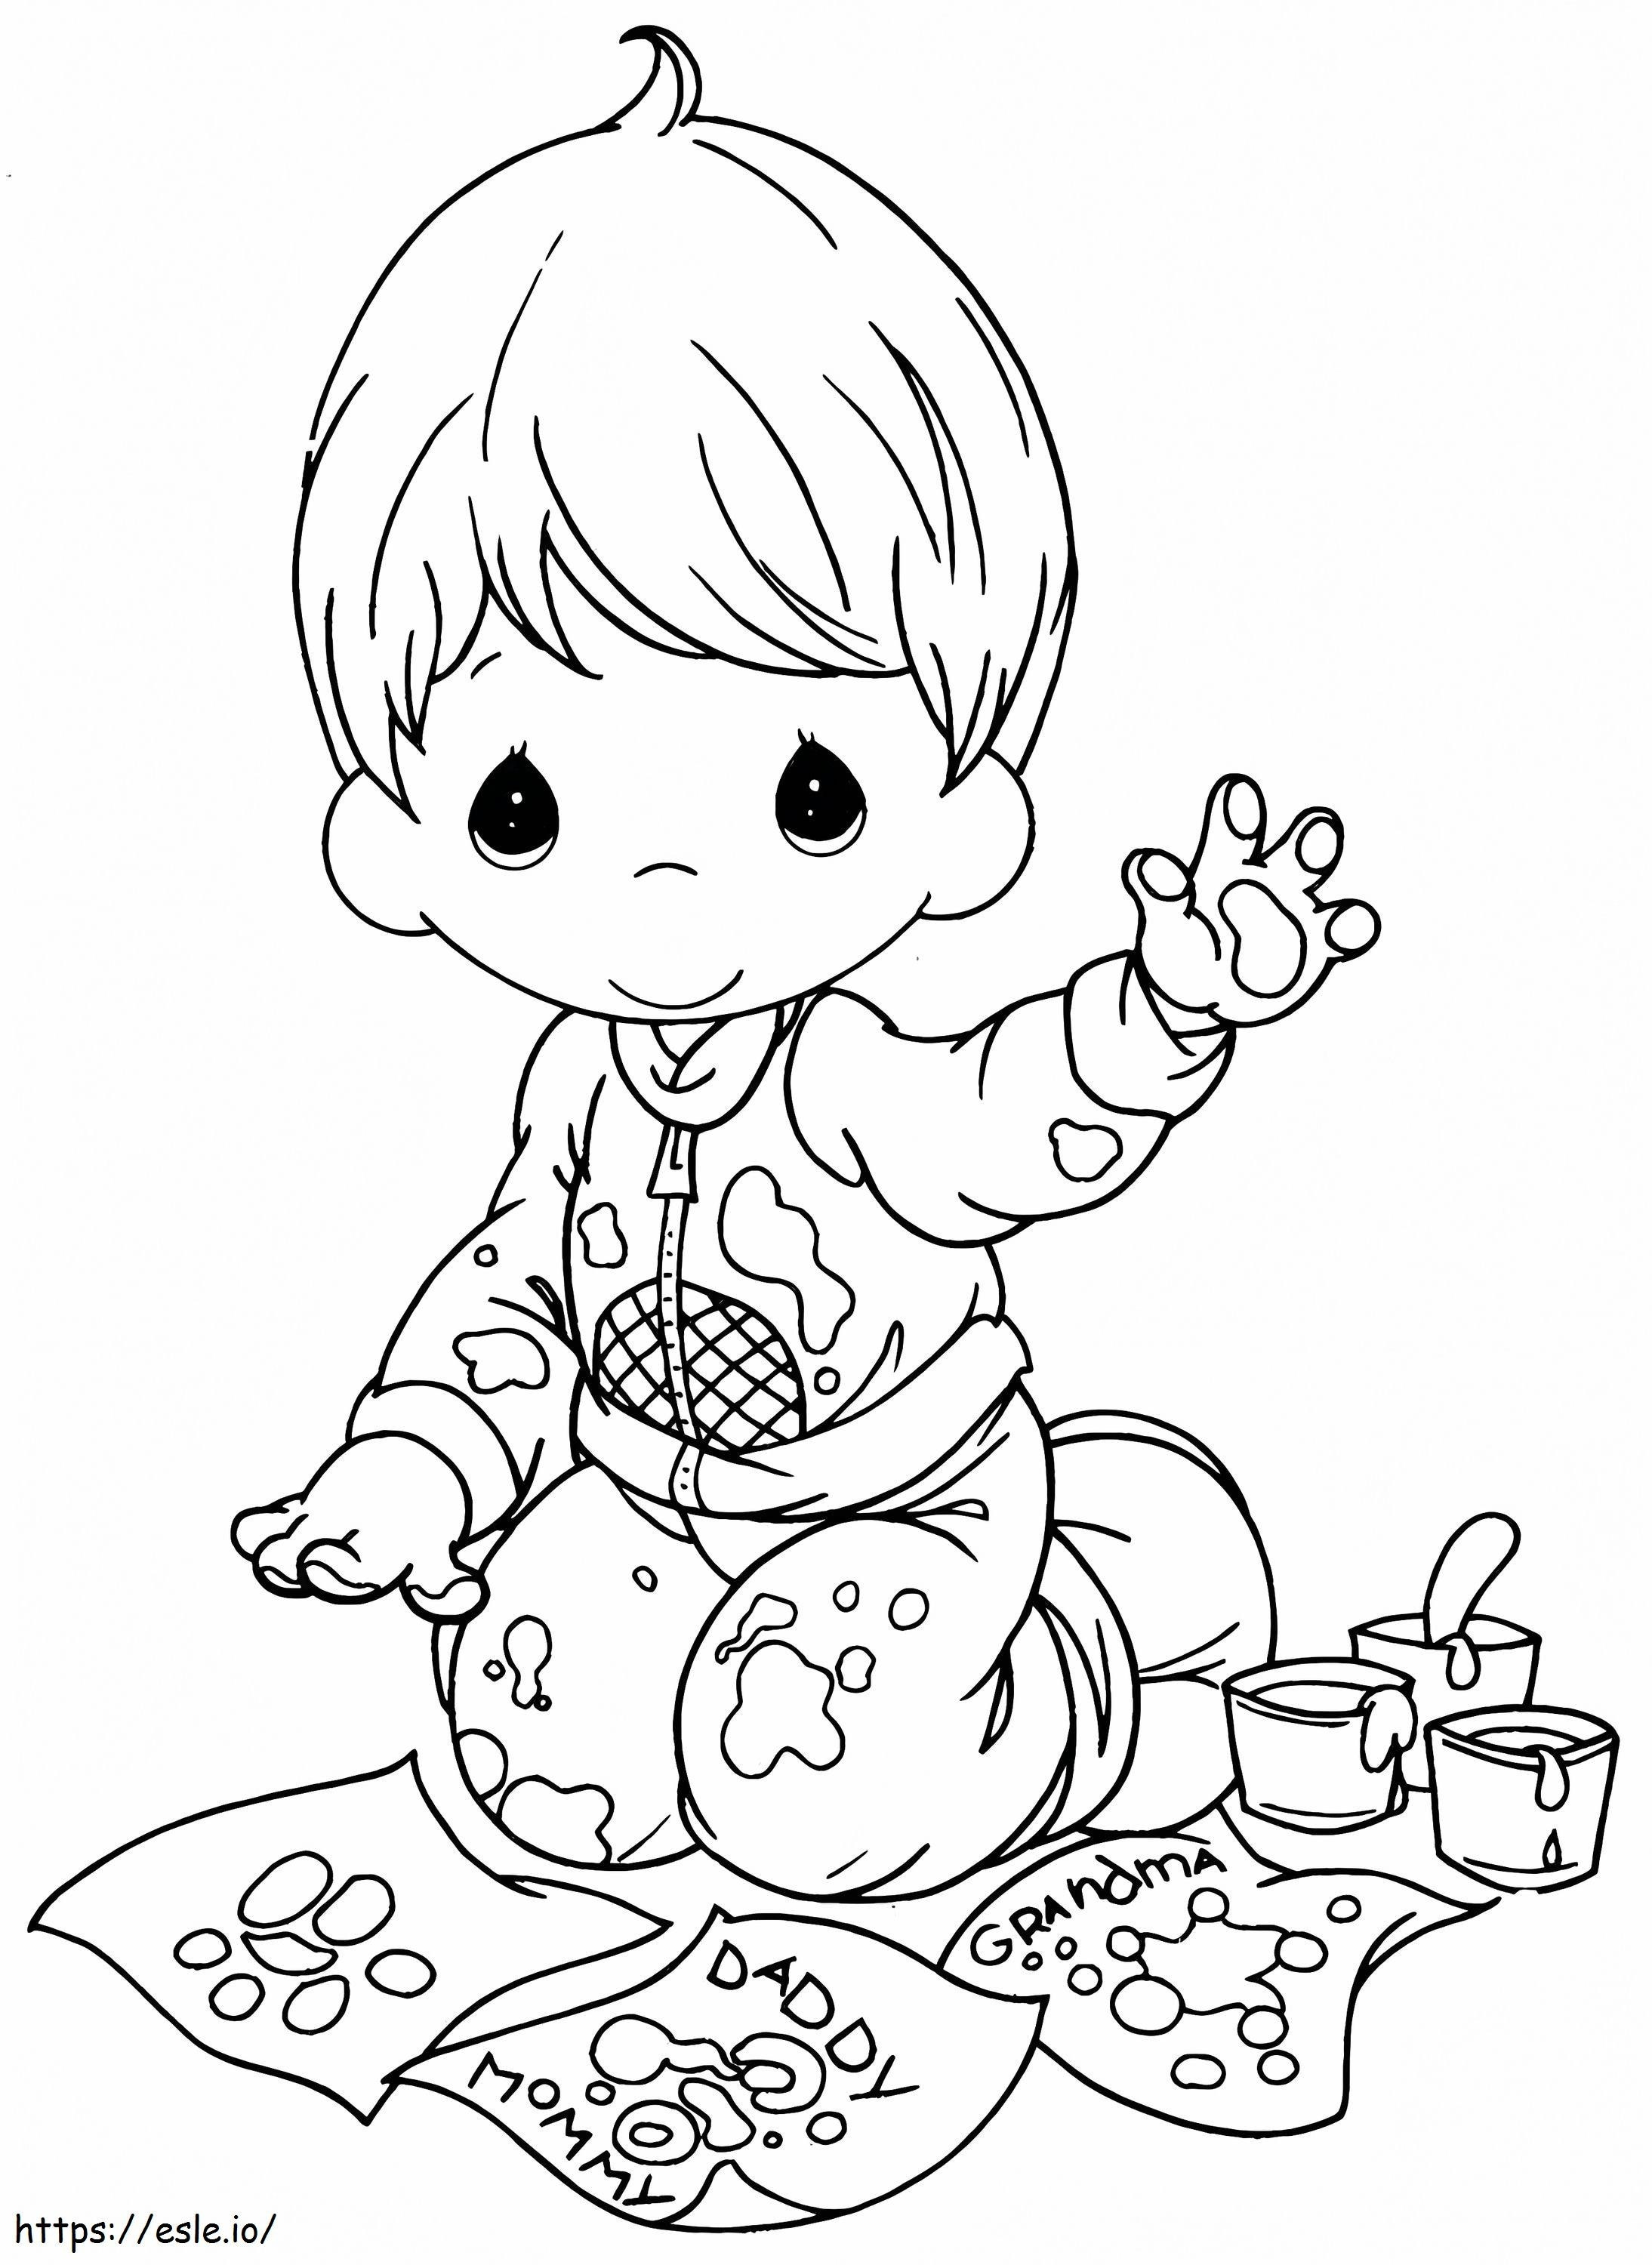 1574642428 Baby Boy Little Boy Precious Moments Kid Painting With His Hands Free Little Boy Coloring Newborn Baby Boy coloring page